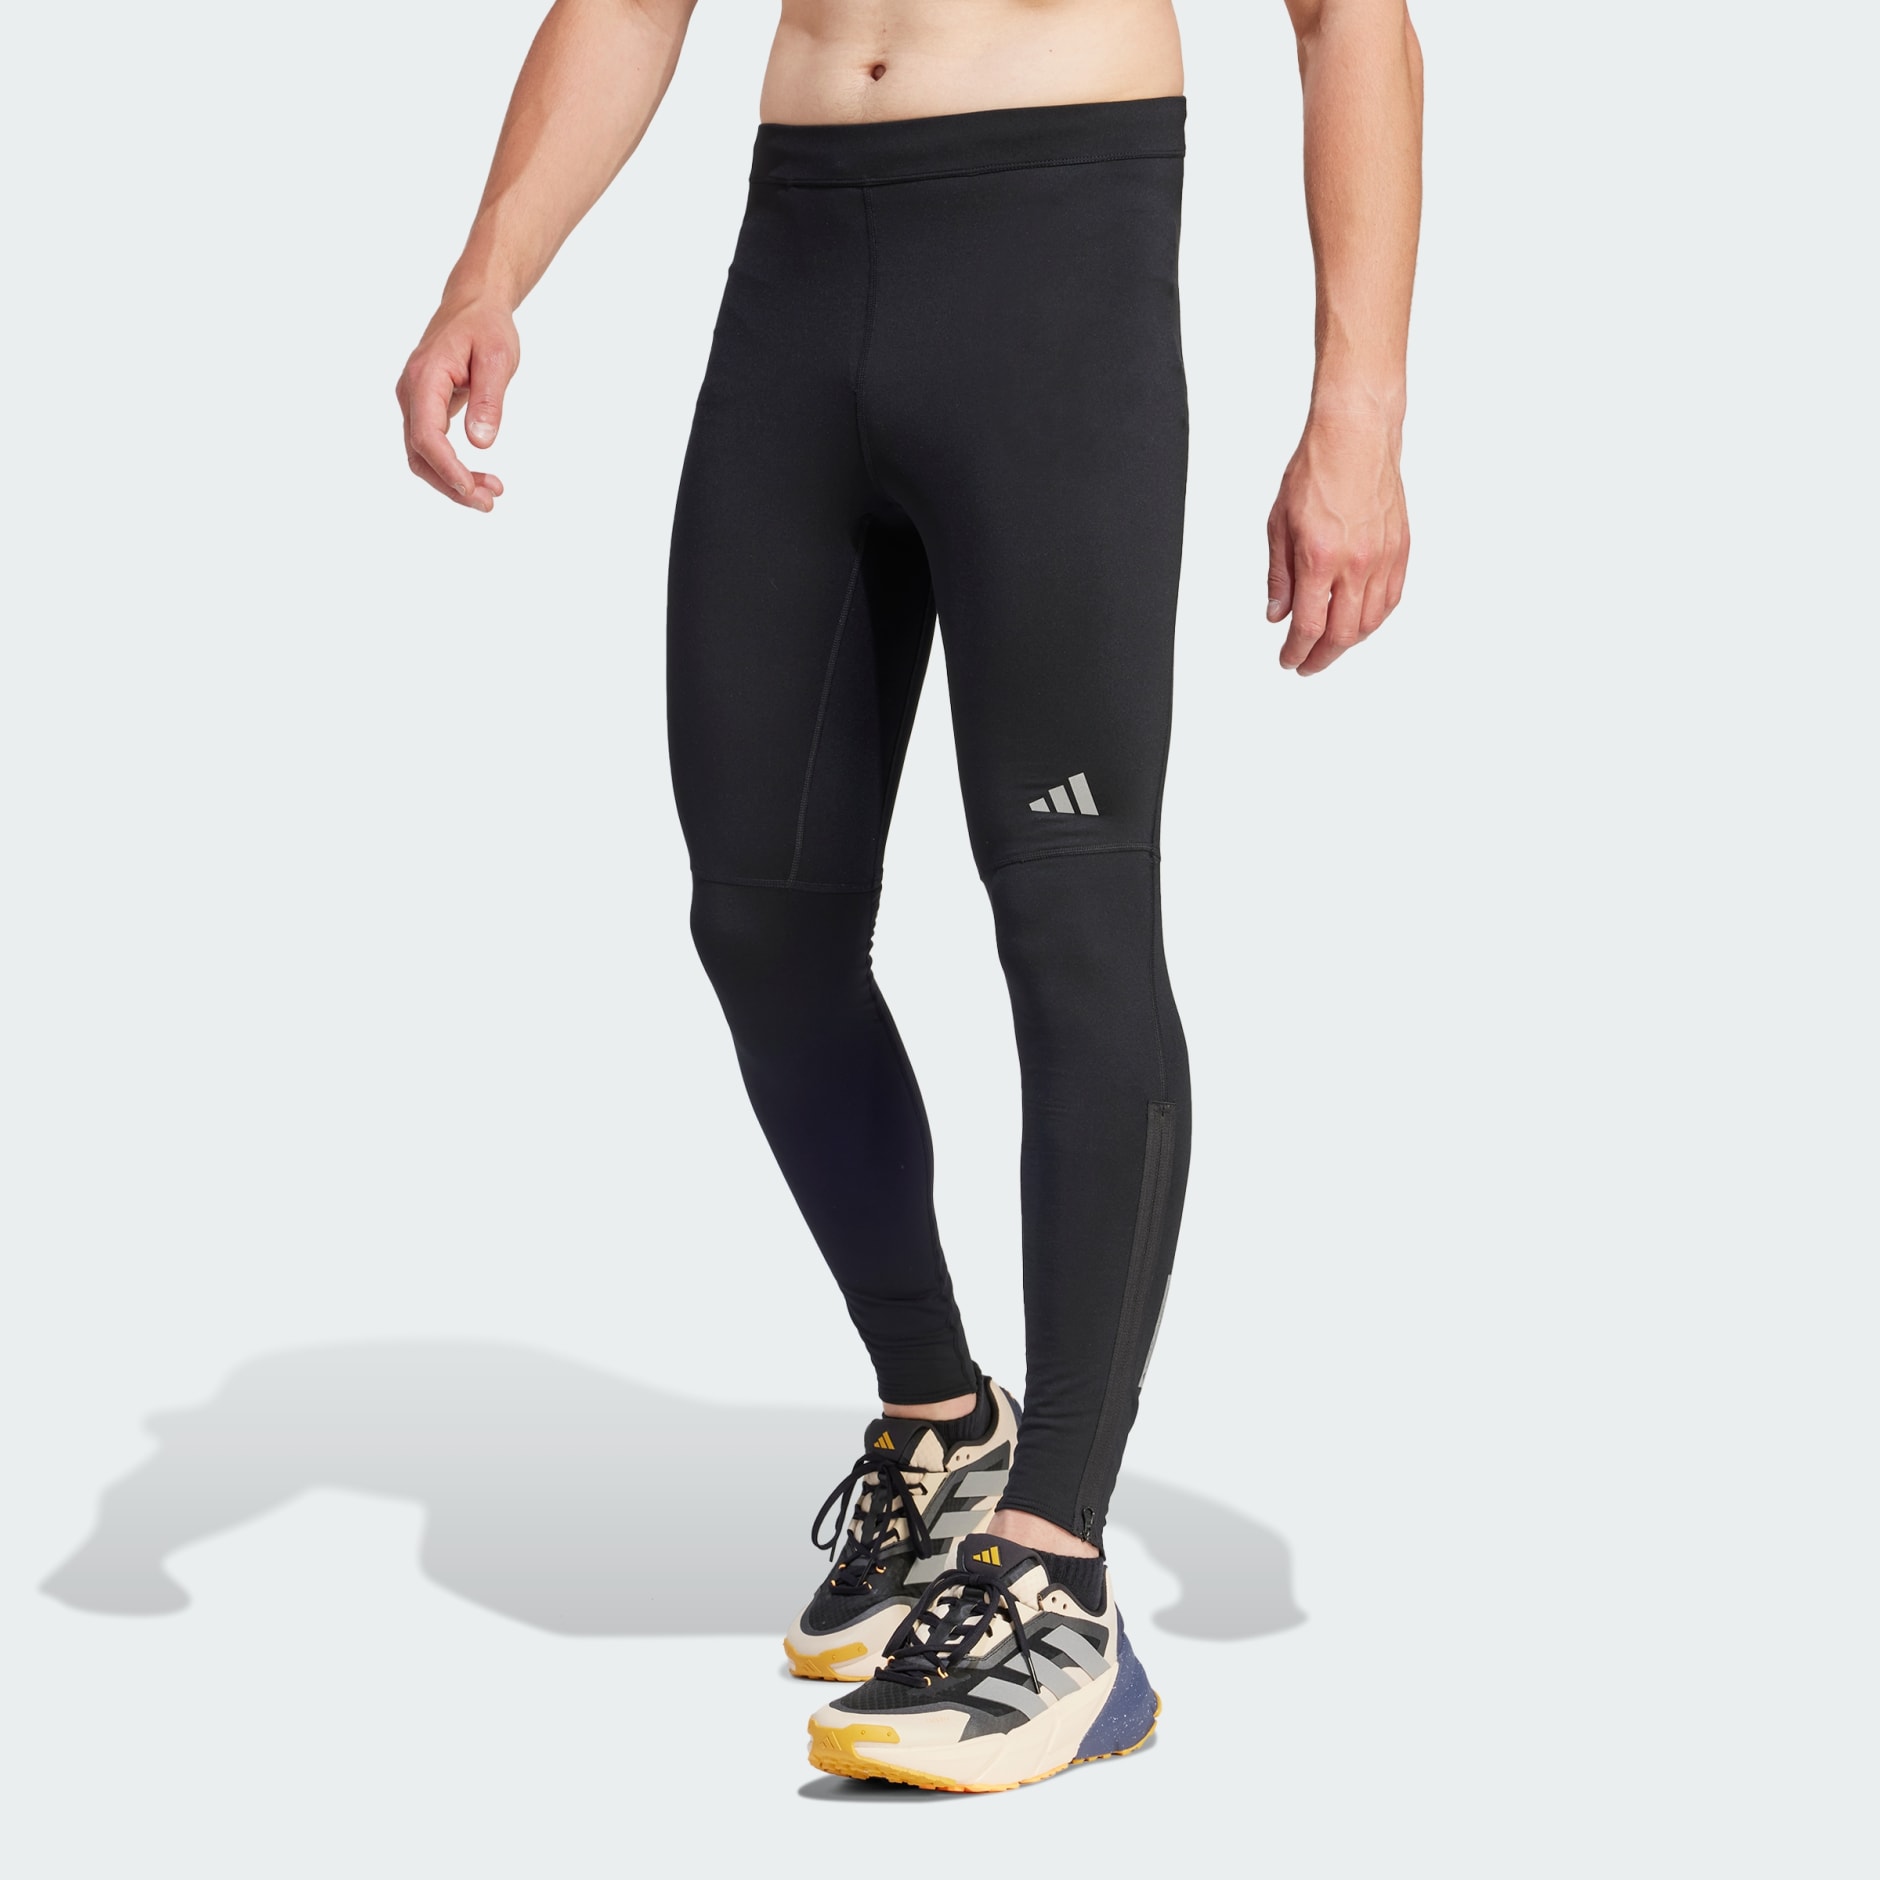 Men's Clothing - Ultimate Running Conquer the Elements AEROREADY